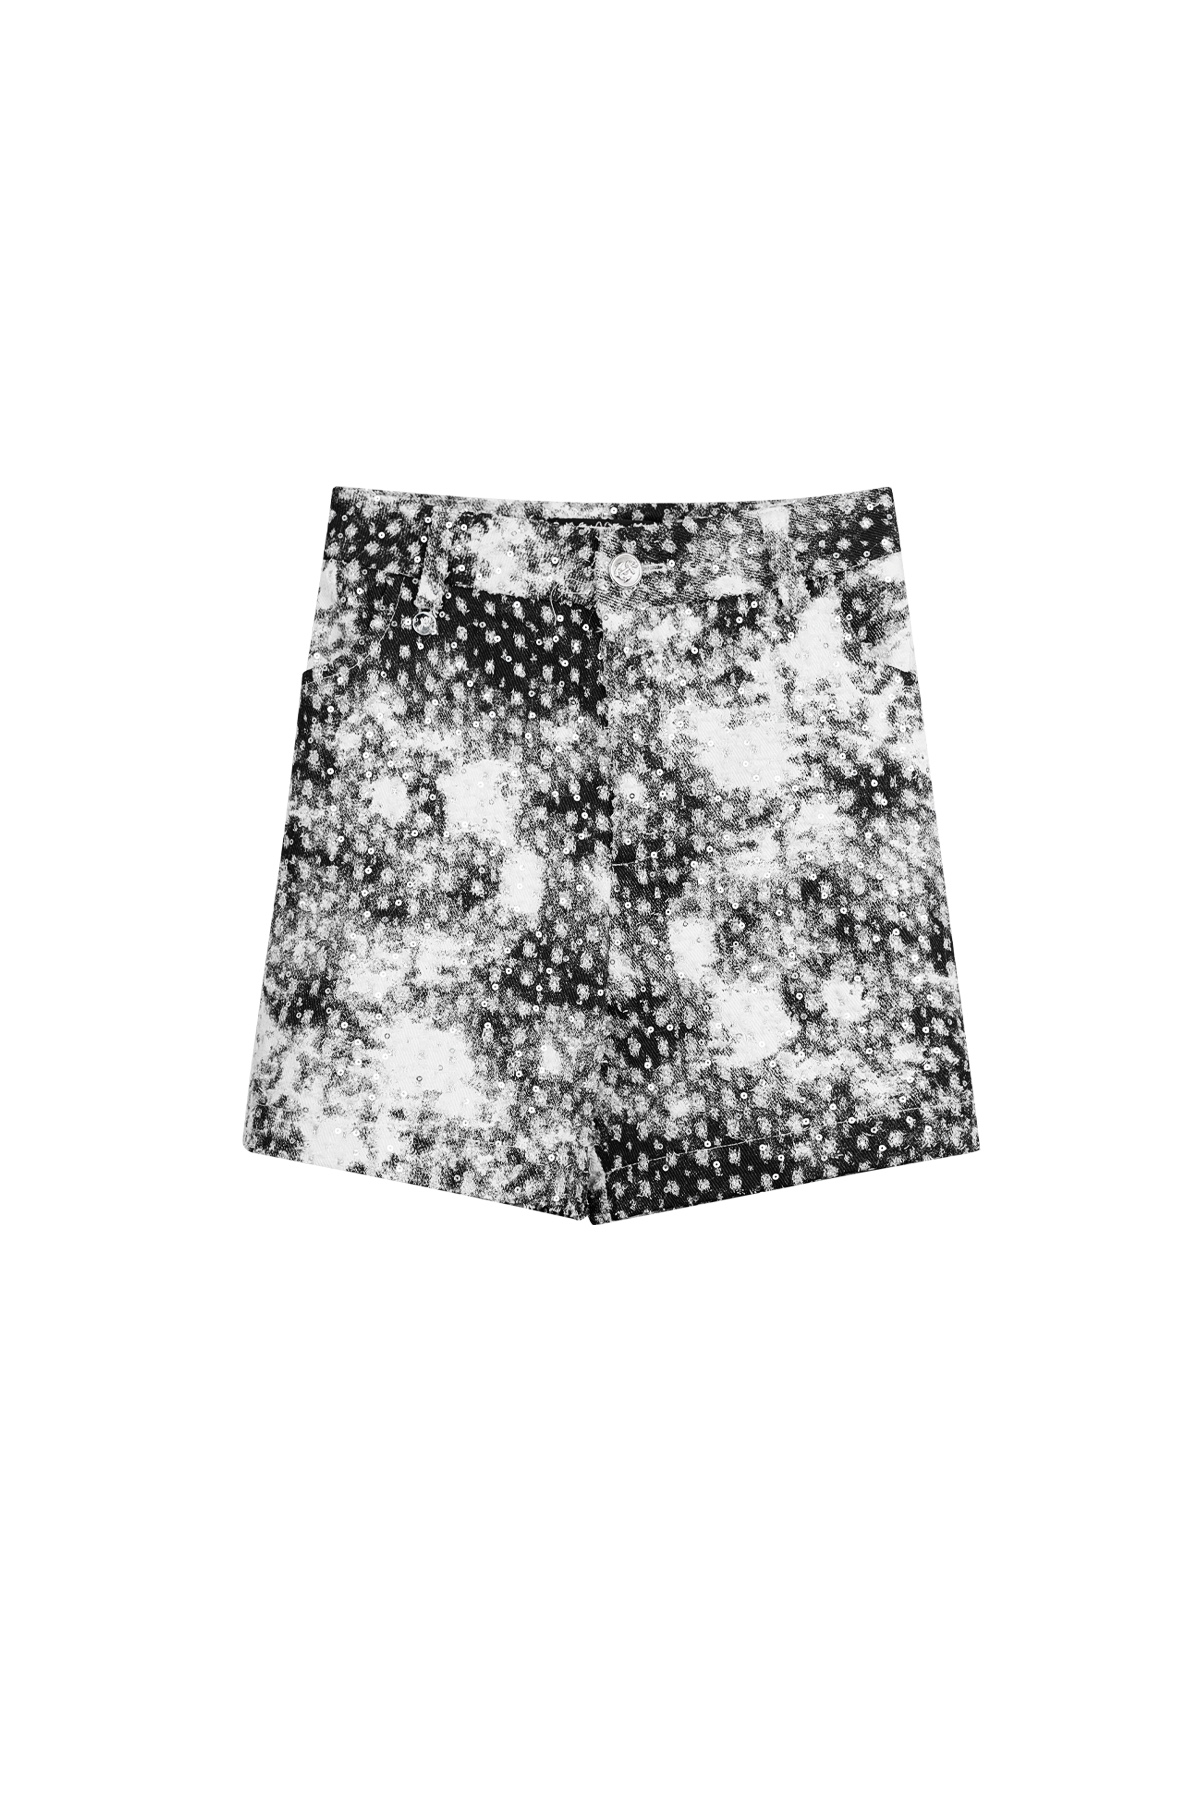 Short spots with glitter - black and white - S